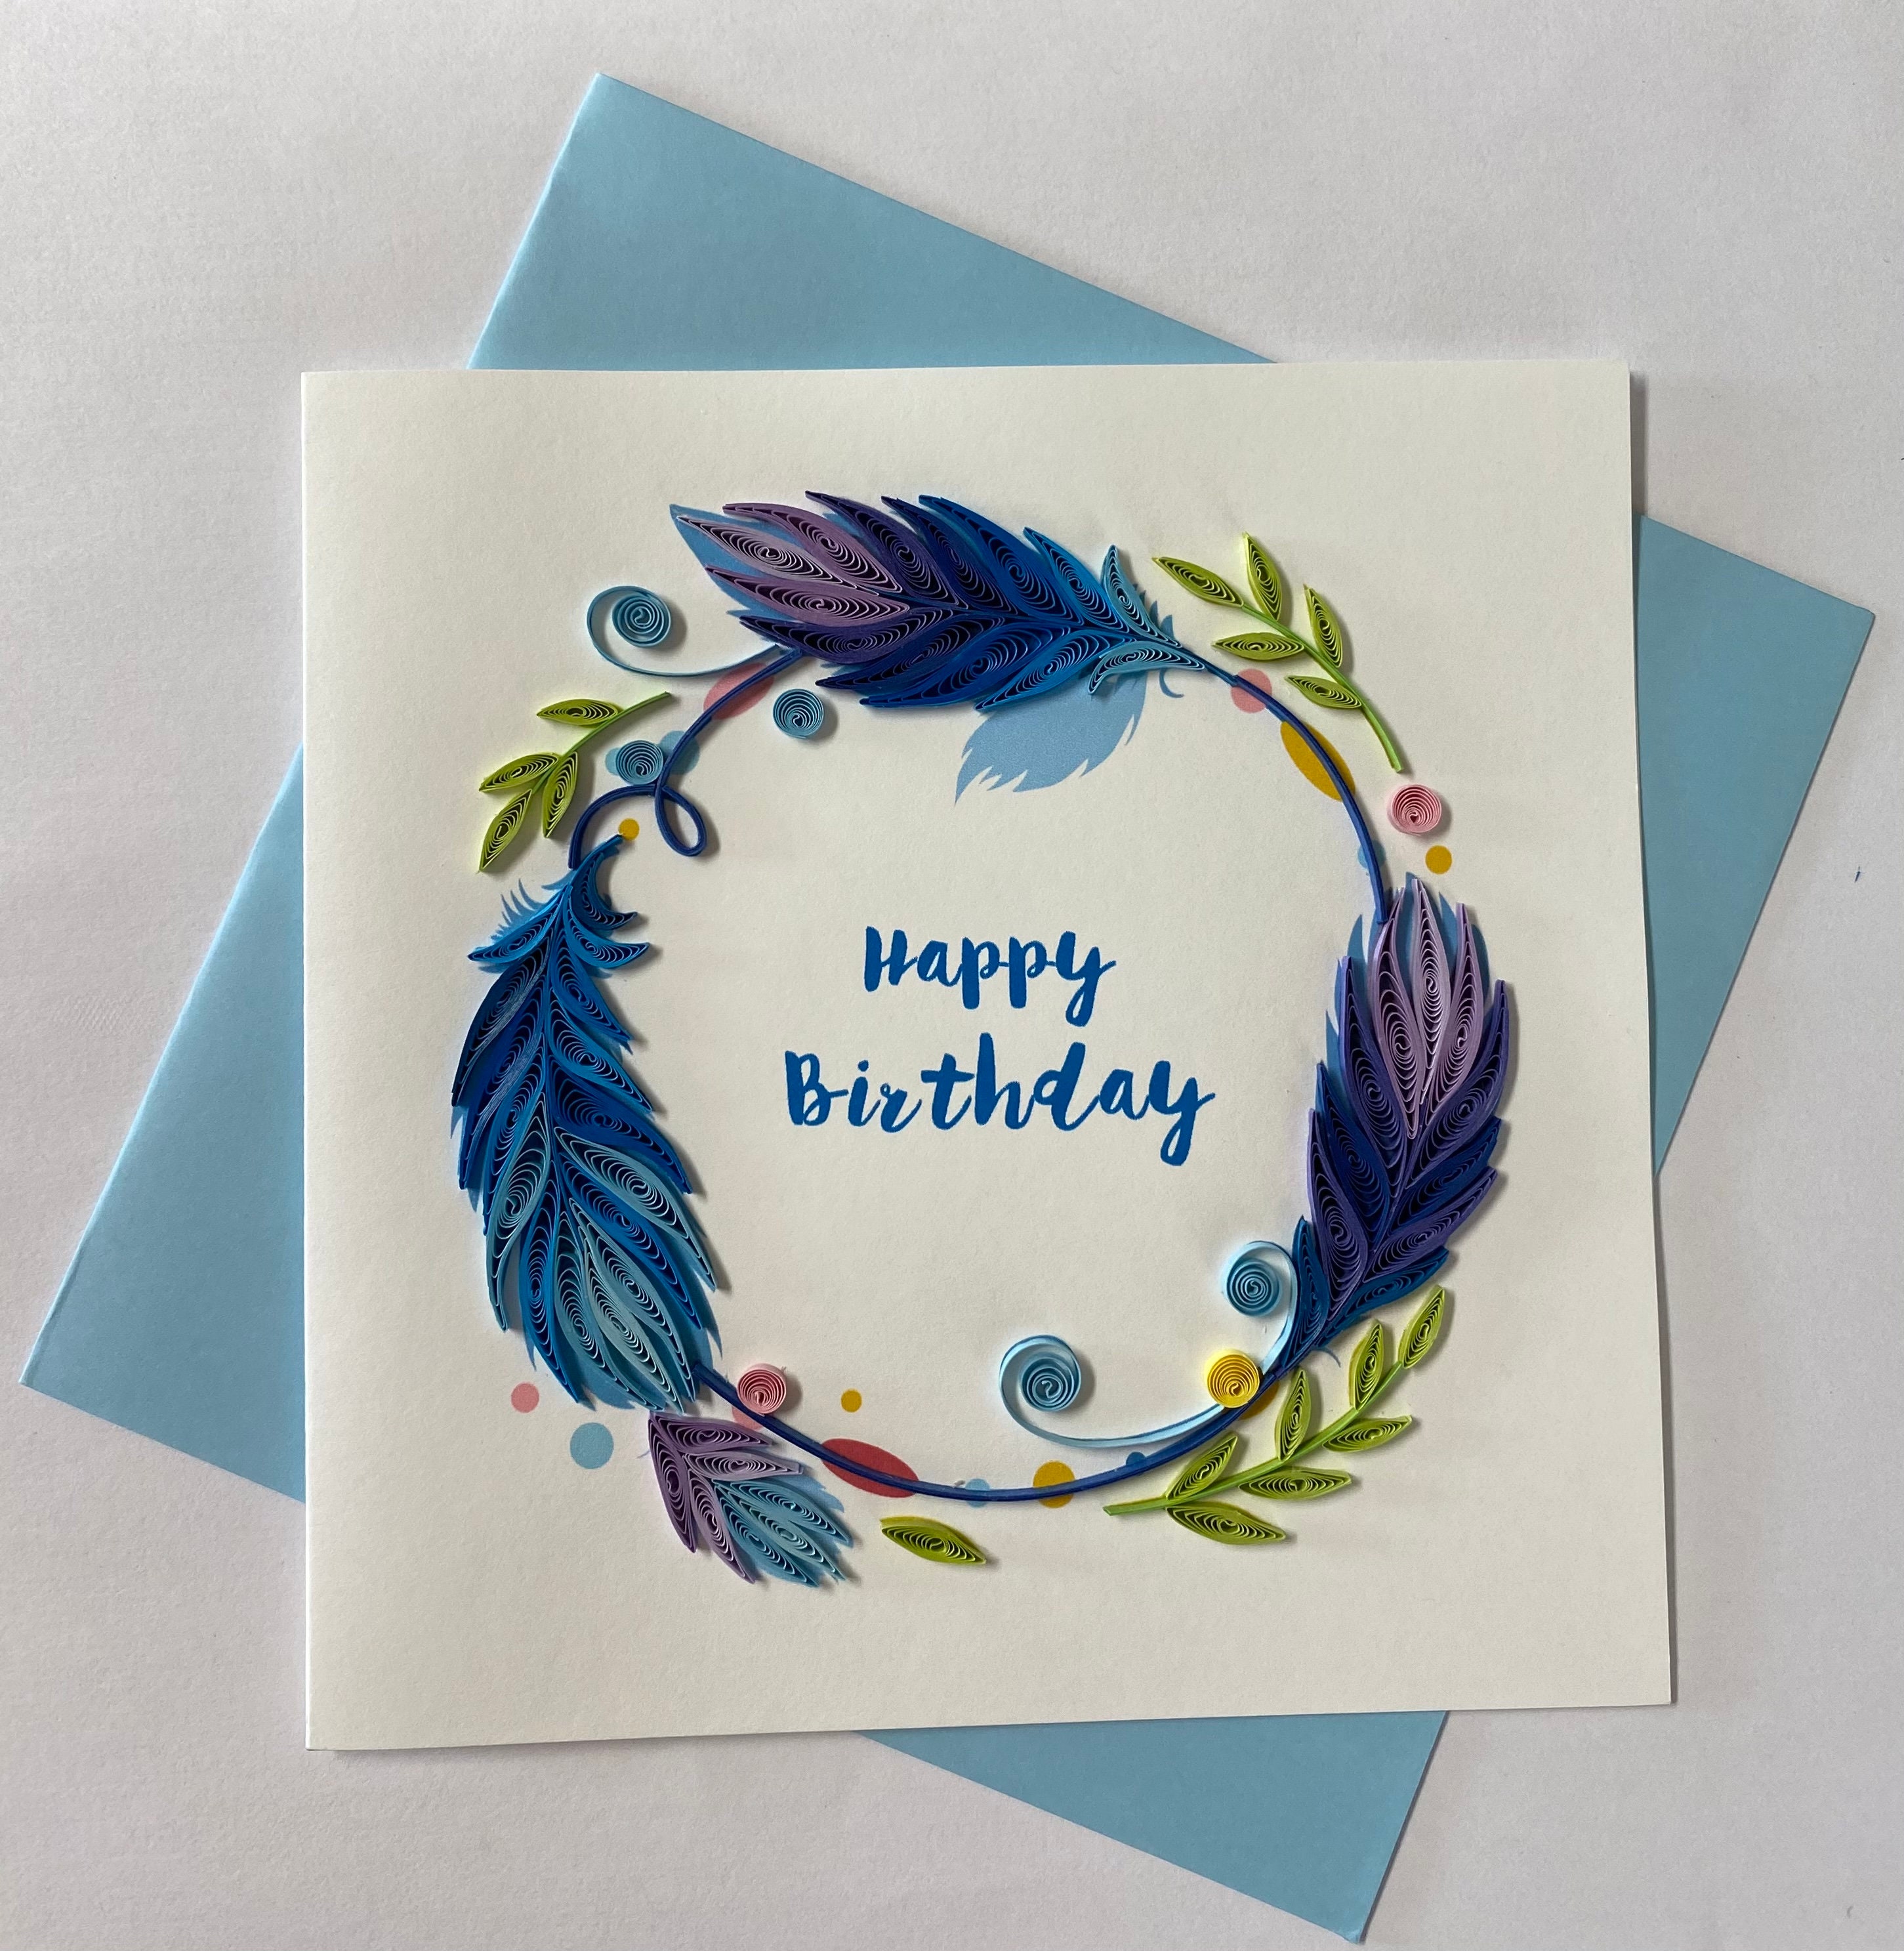 Happy birthday Card, Quilling Greeting Card, handmade greeting card,  quilling cards, quilled cards, Greeting Card